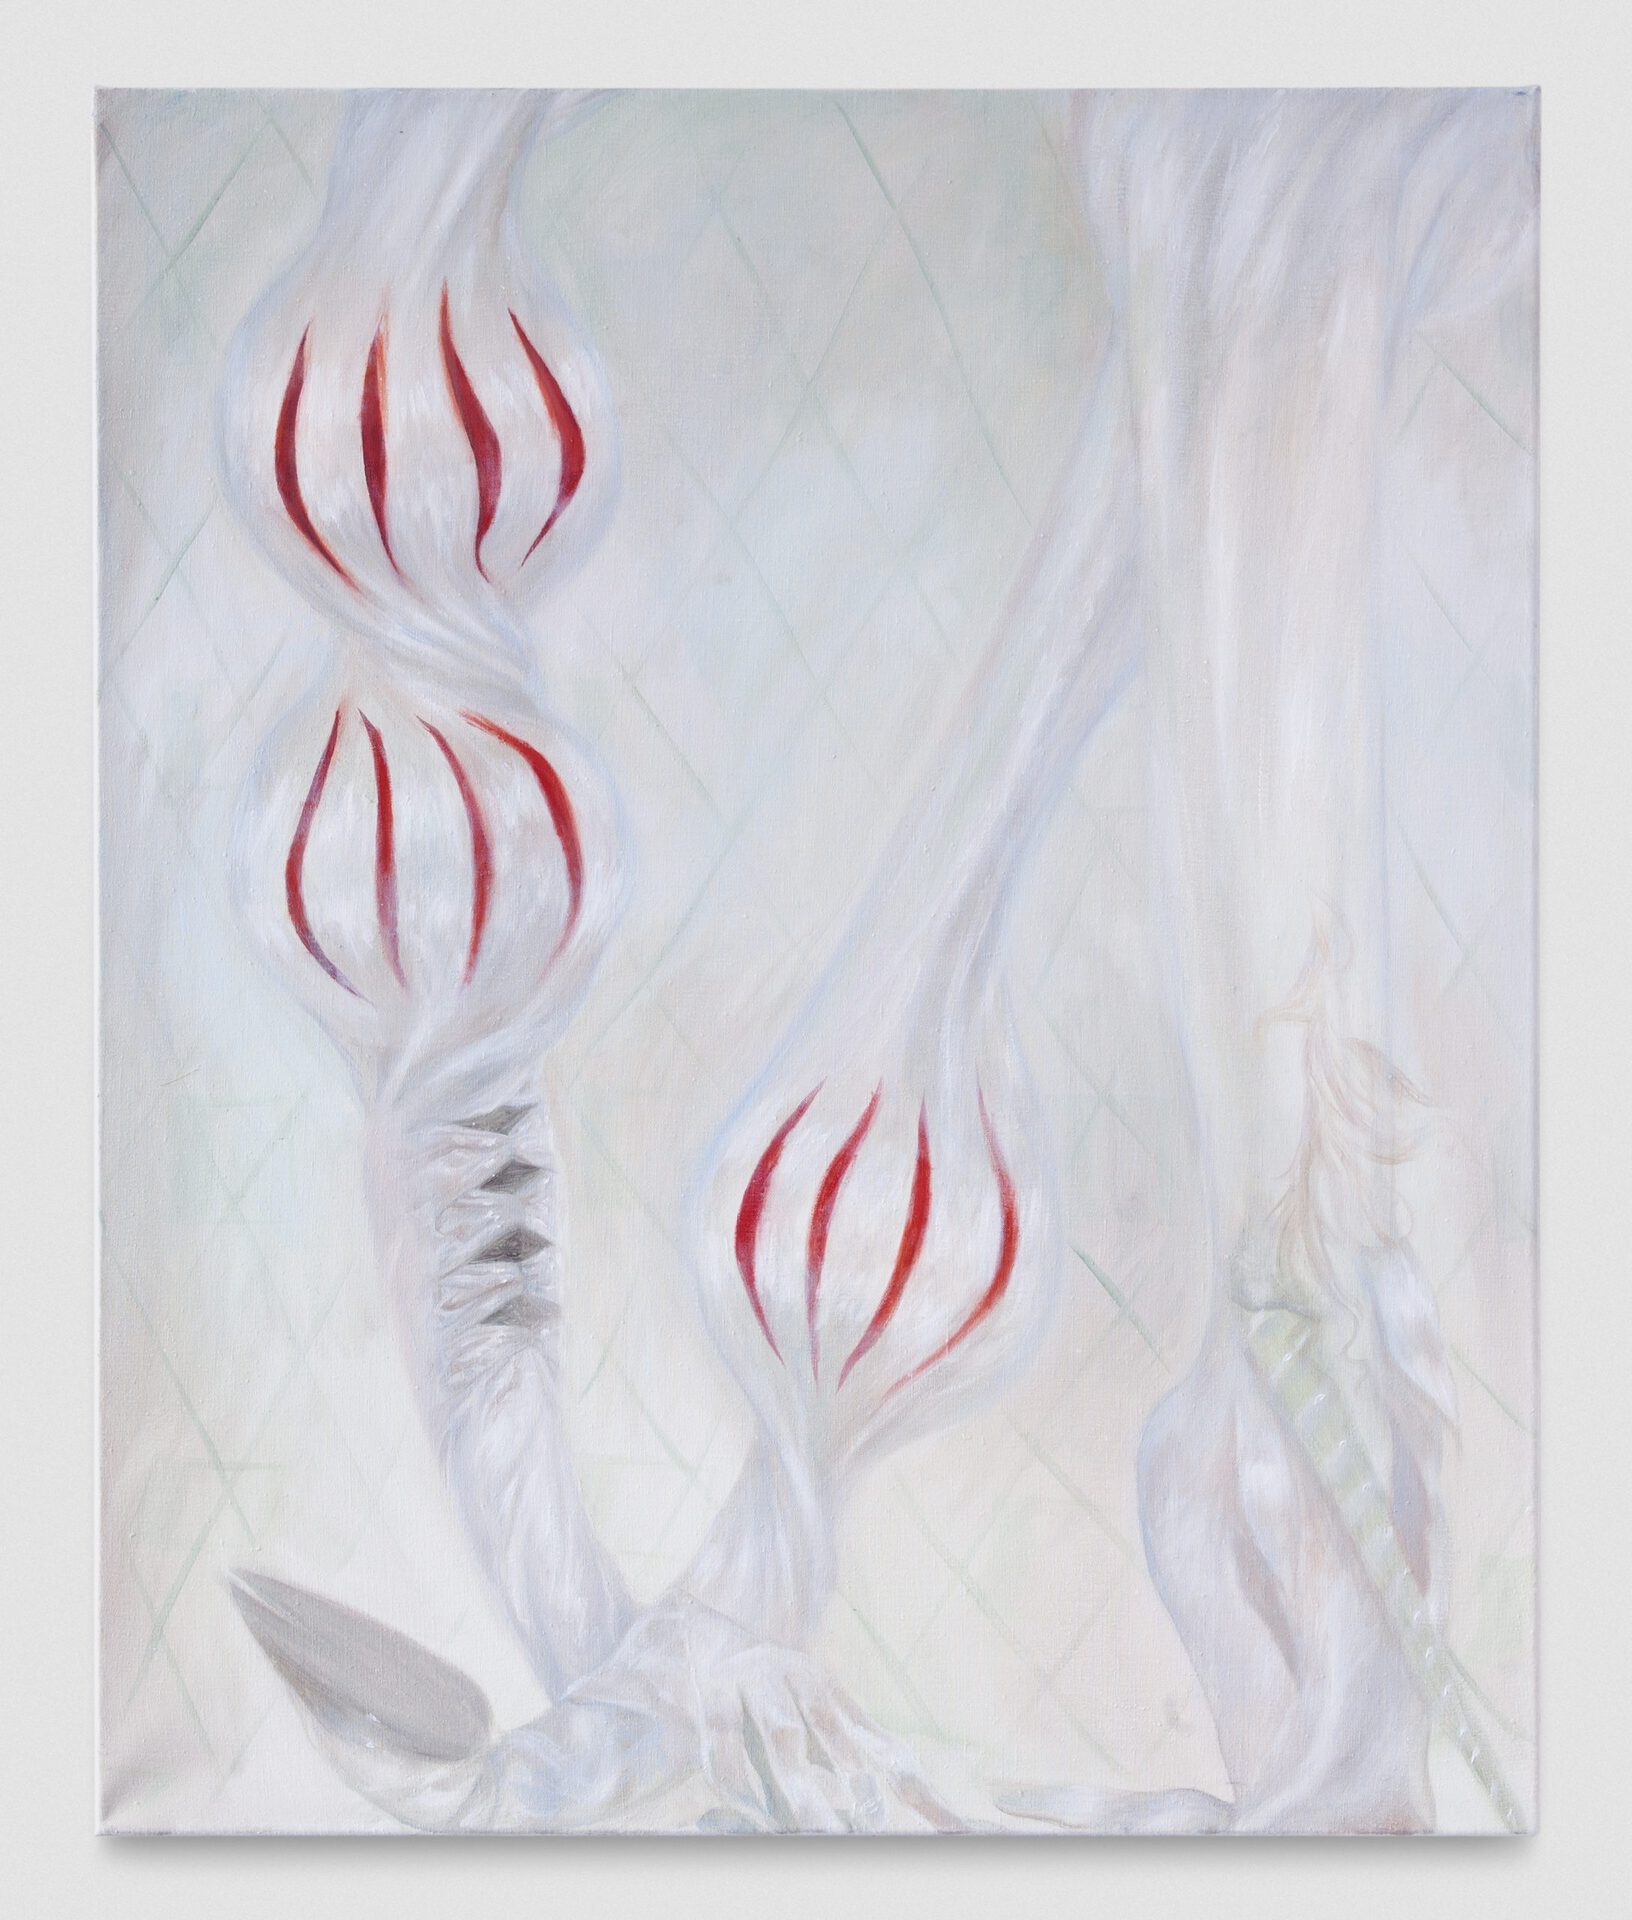 Alison Yip, Significant Other, 2020, oil on canvas, 71 x 68 cm, exhibition view, Dortmunder Kunstverein  Photo: Dortmunder Kunstverein